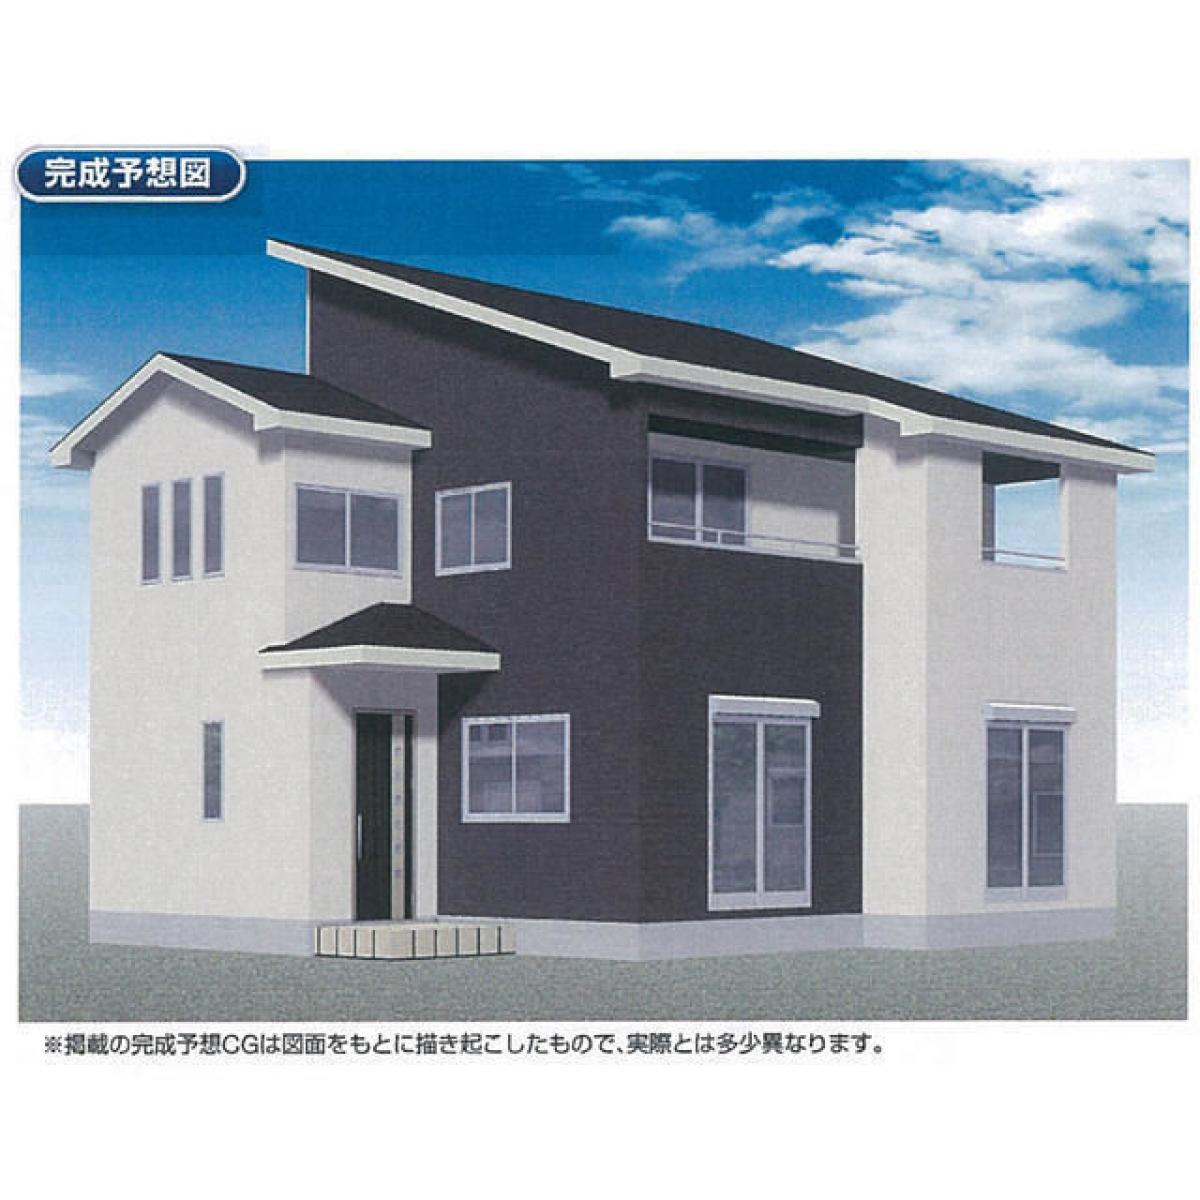 Picture of Home For Sale in Kiryu Shi, Gumma, Japan